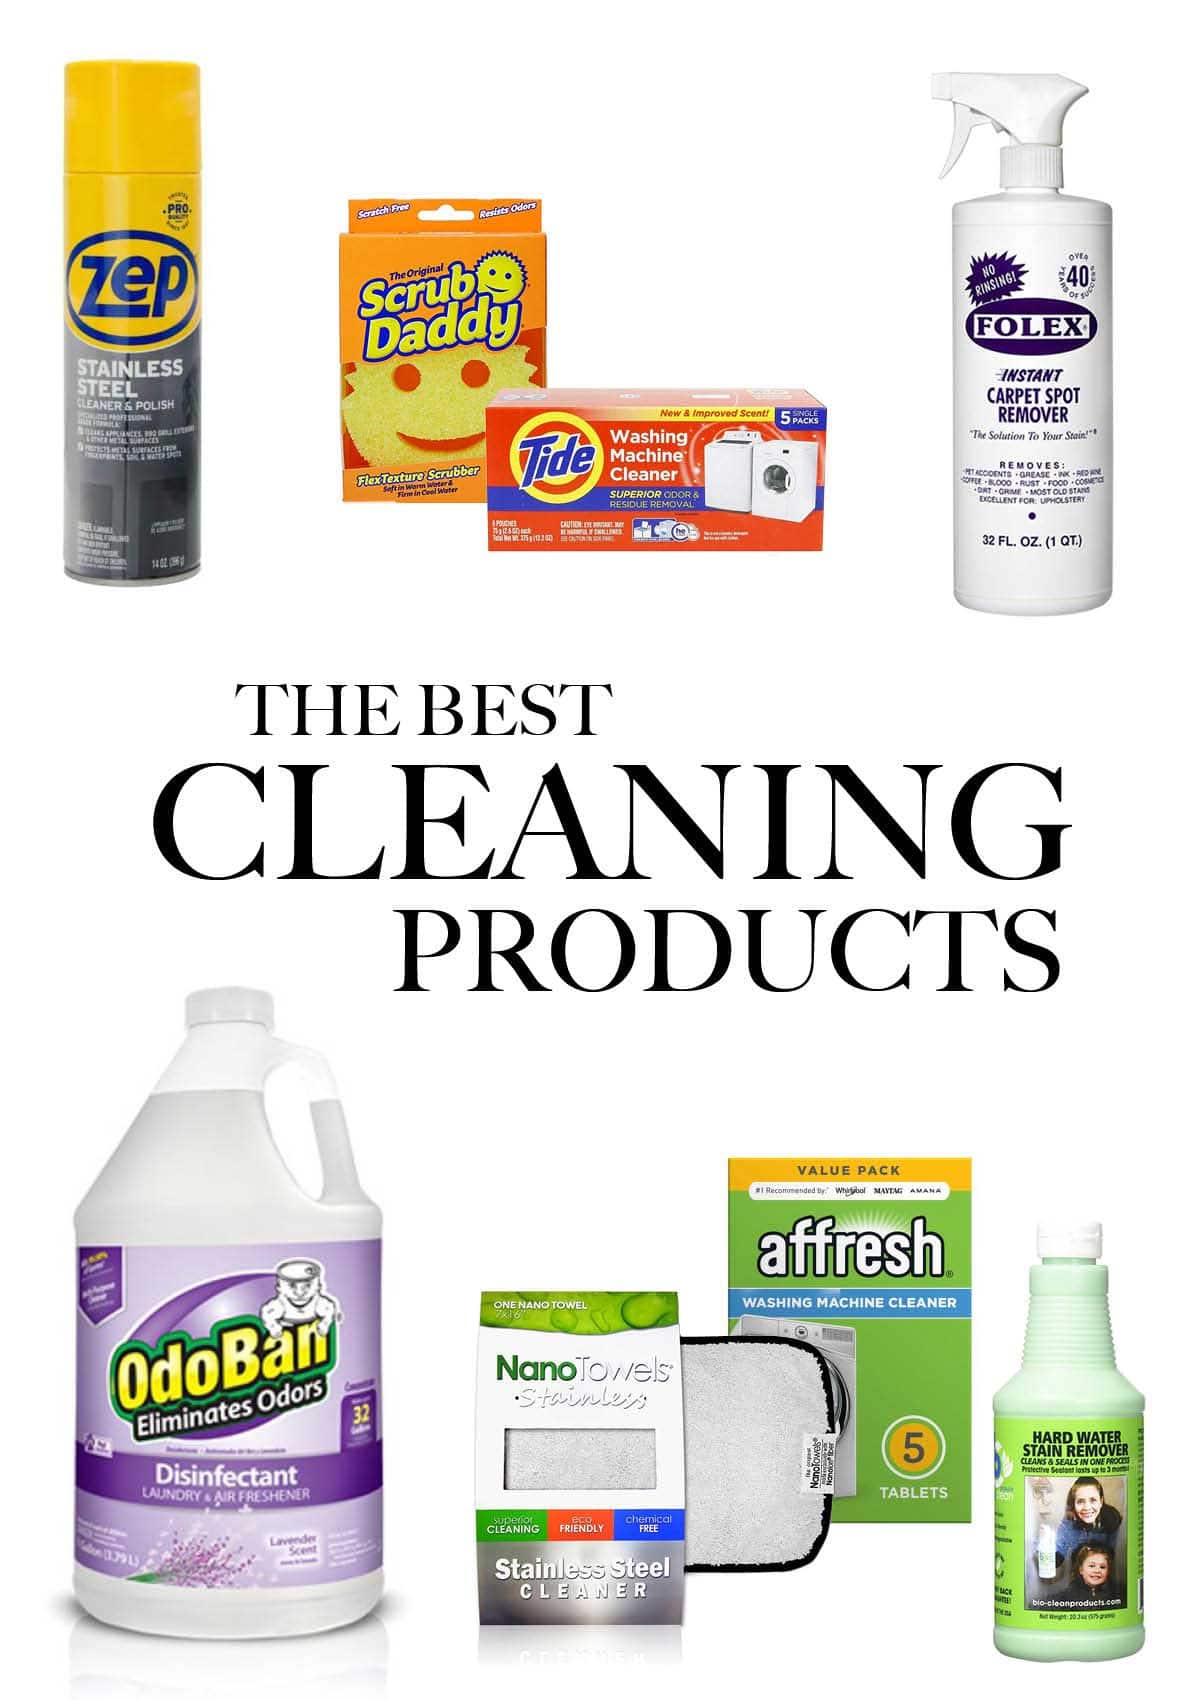 https://houseofhipsters.com/wp-content/uploads/2020/06/cleaning-products-home-2.jpg